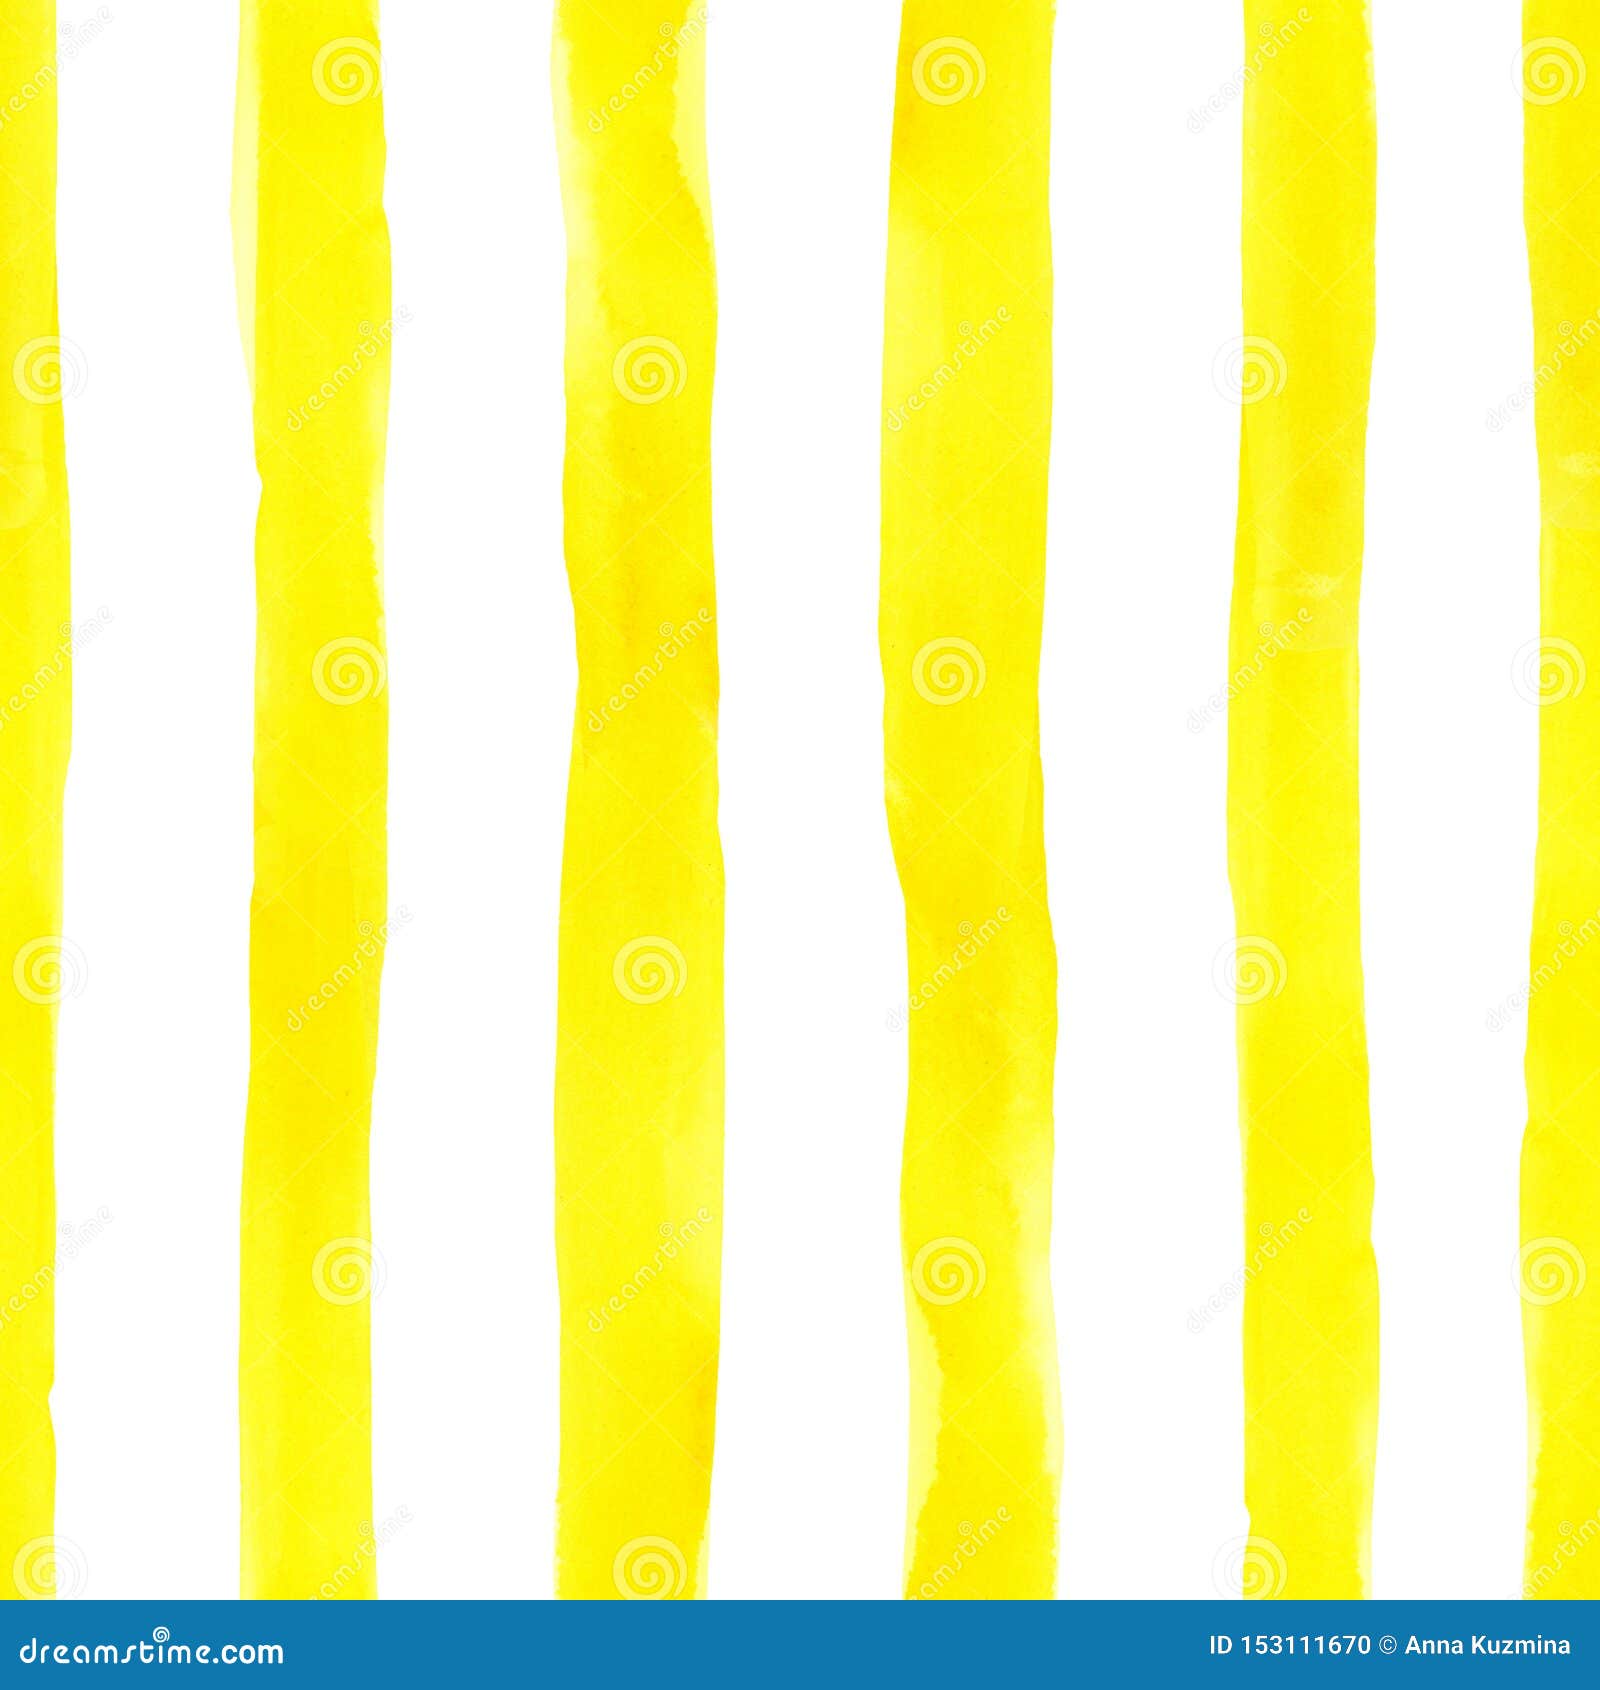 watercolor bright seamless pattern with painted yellow stripes on white background. cute colorful endless print, vintage style